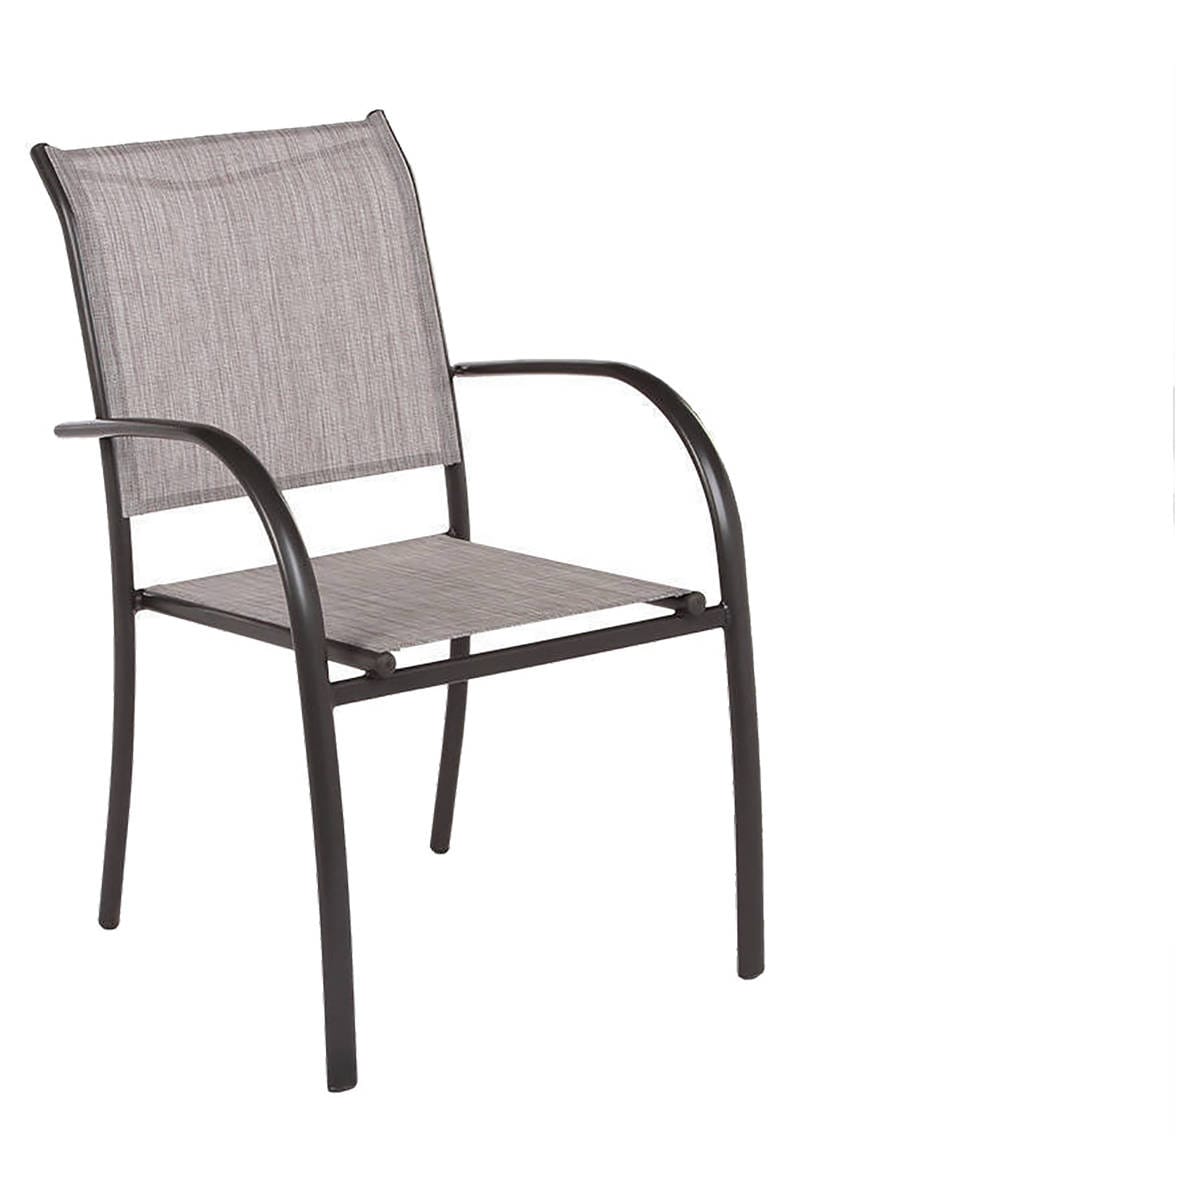 Hespéride Fauteuil empilable Piazza Galet chiné/Silver Mat